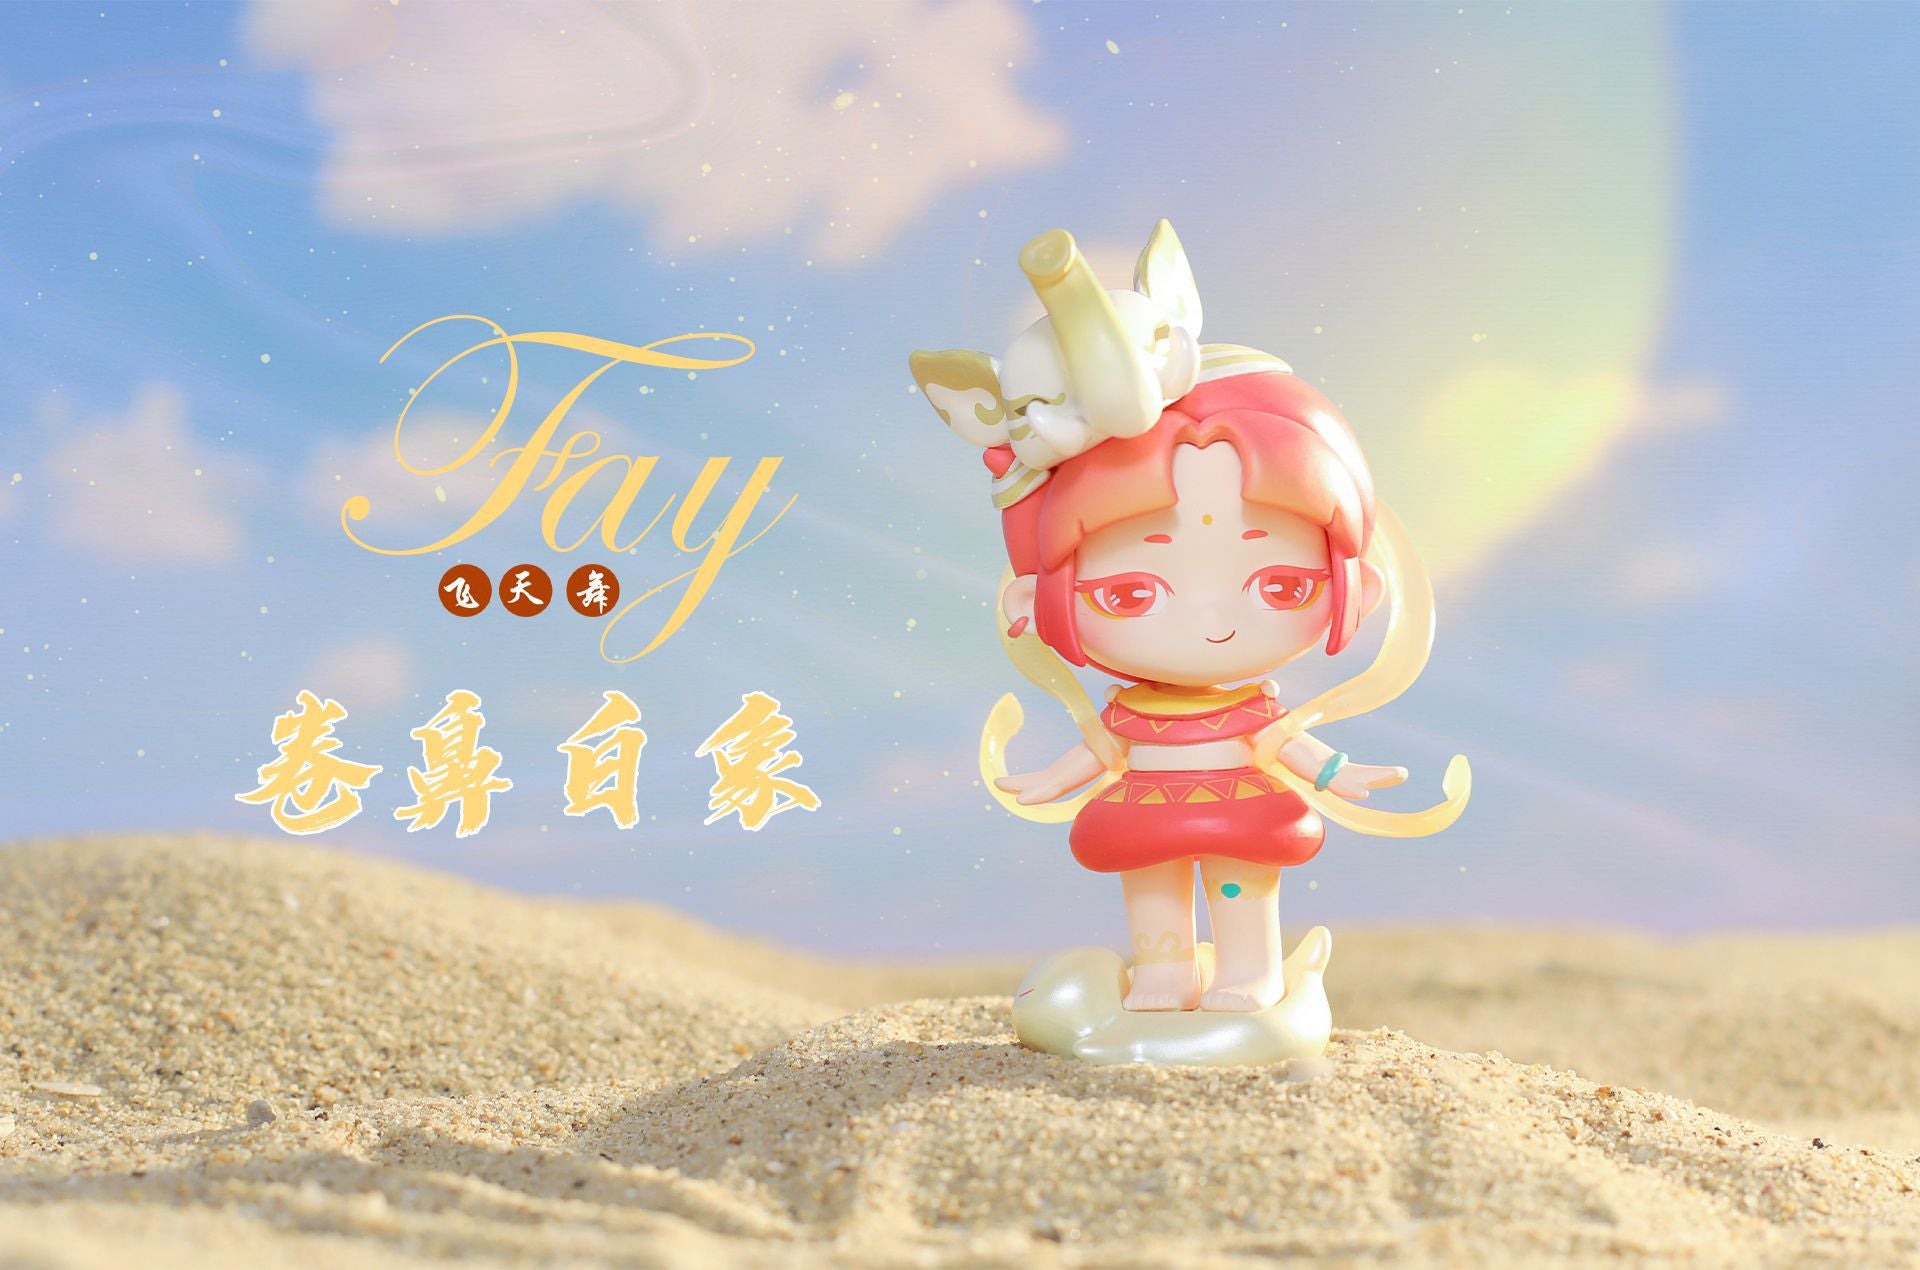 [52 TOYS] FAY Dancing In The Sky Series